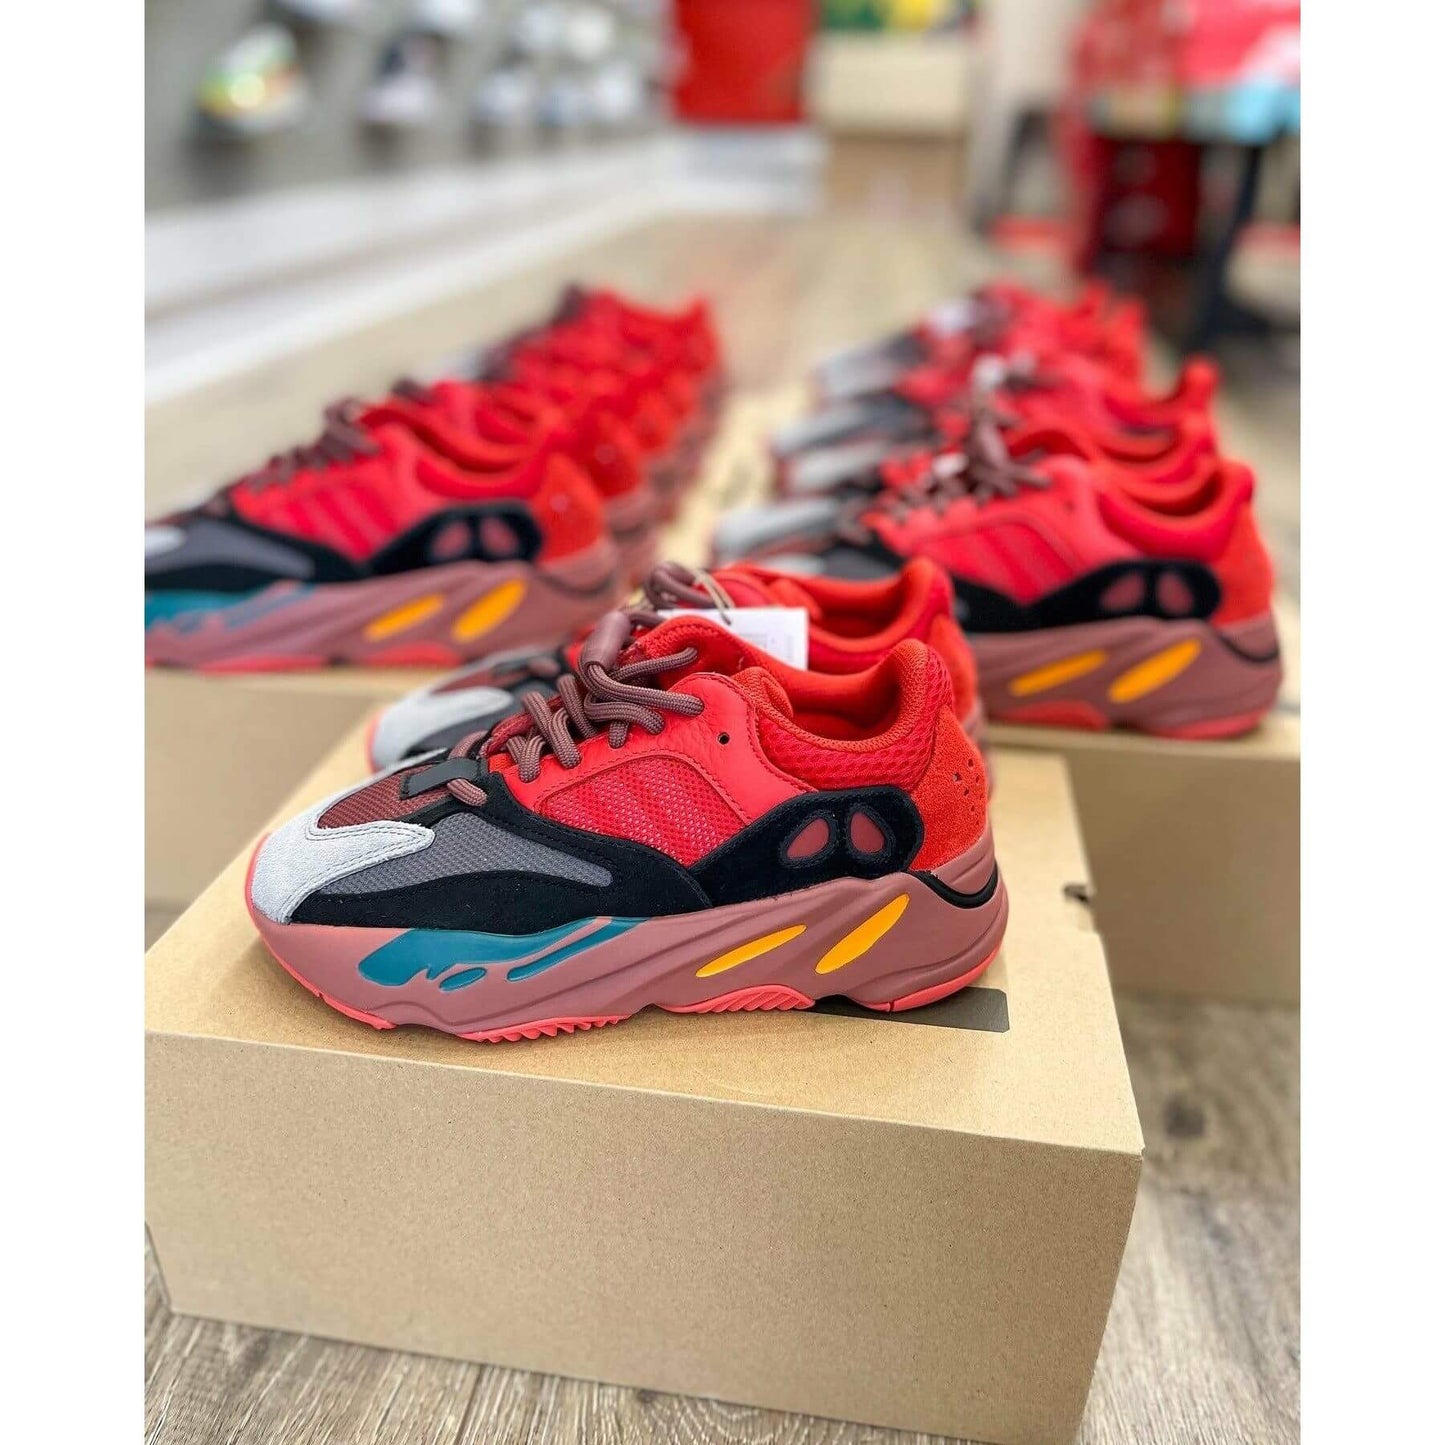 adidas Yeezy Boost 700 Hi-Res Red from Yeezy